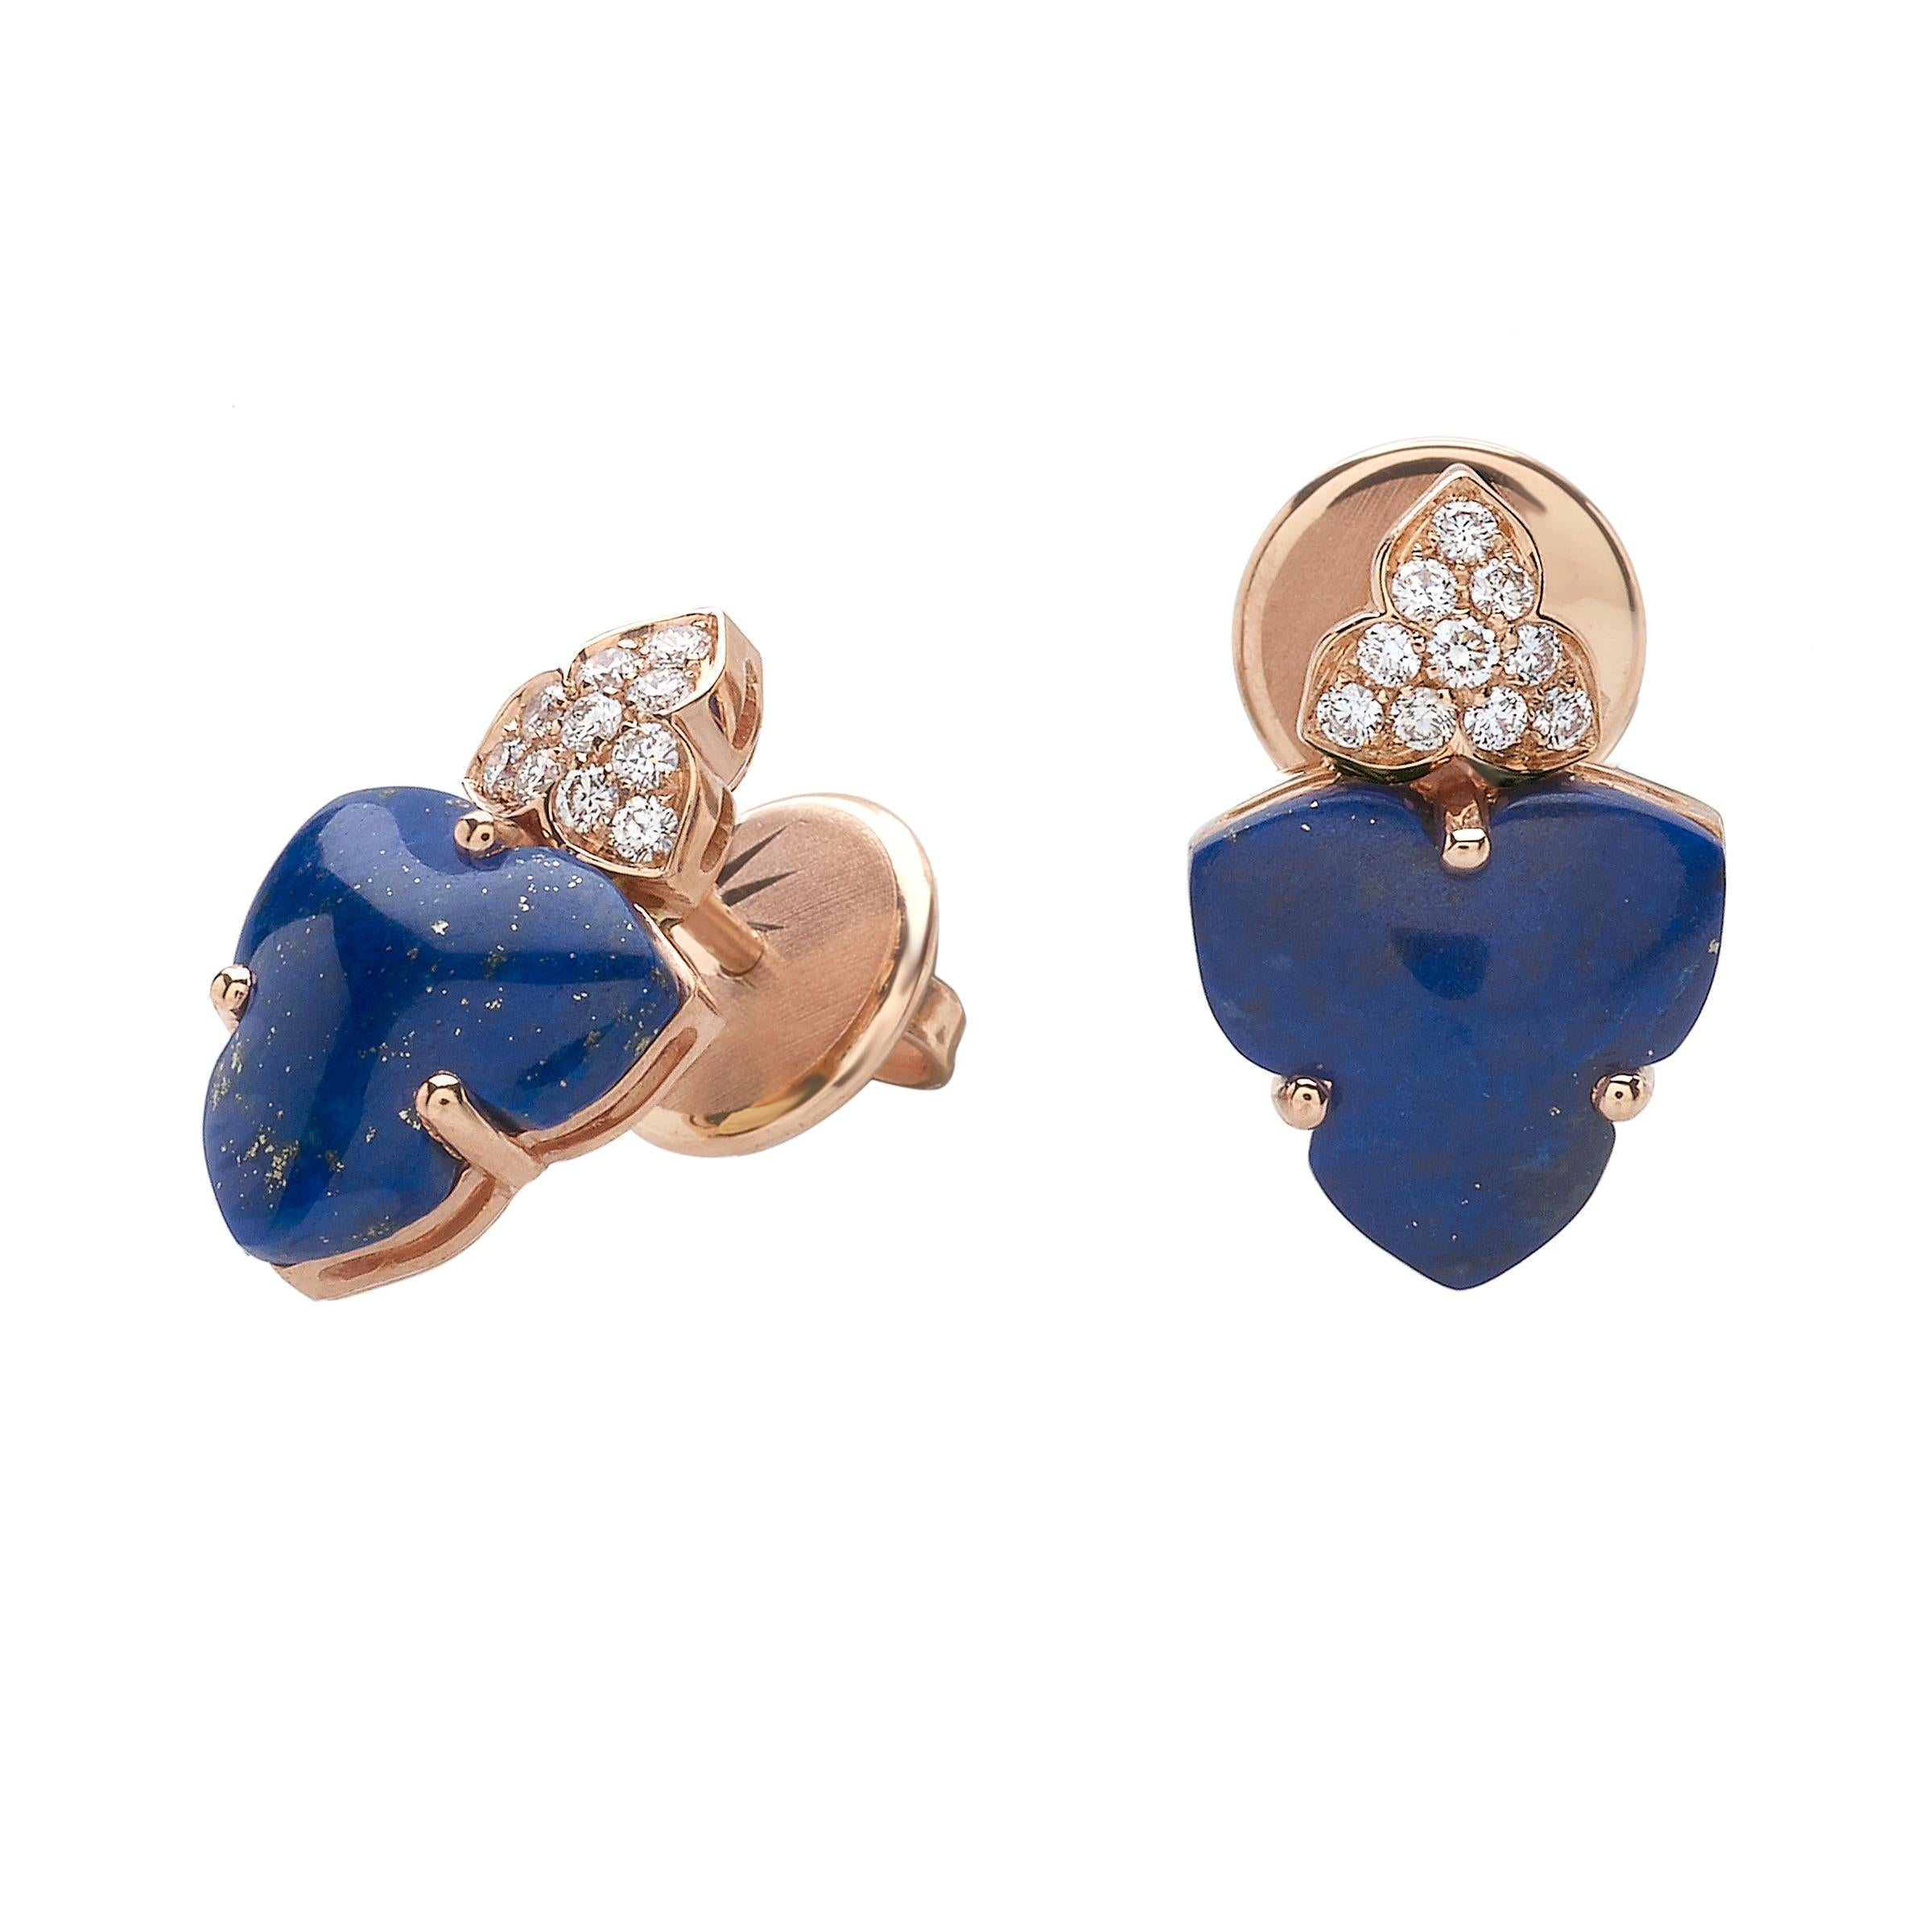 18 Carat Pink Gold Round Cut Diamonds and Lapis Lazuli Stud Earrings, featuring 0,18 carats of diamonds, G color, VVS clarity; total piece weight: 4,80 gr
Handmade in Italy, ready in stock
Being a handmade jewel the above characteristics may be